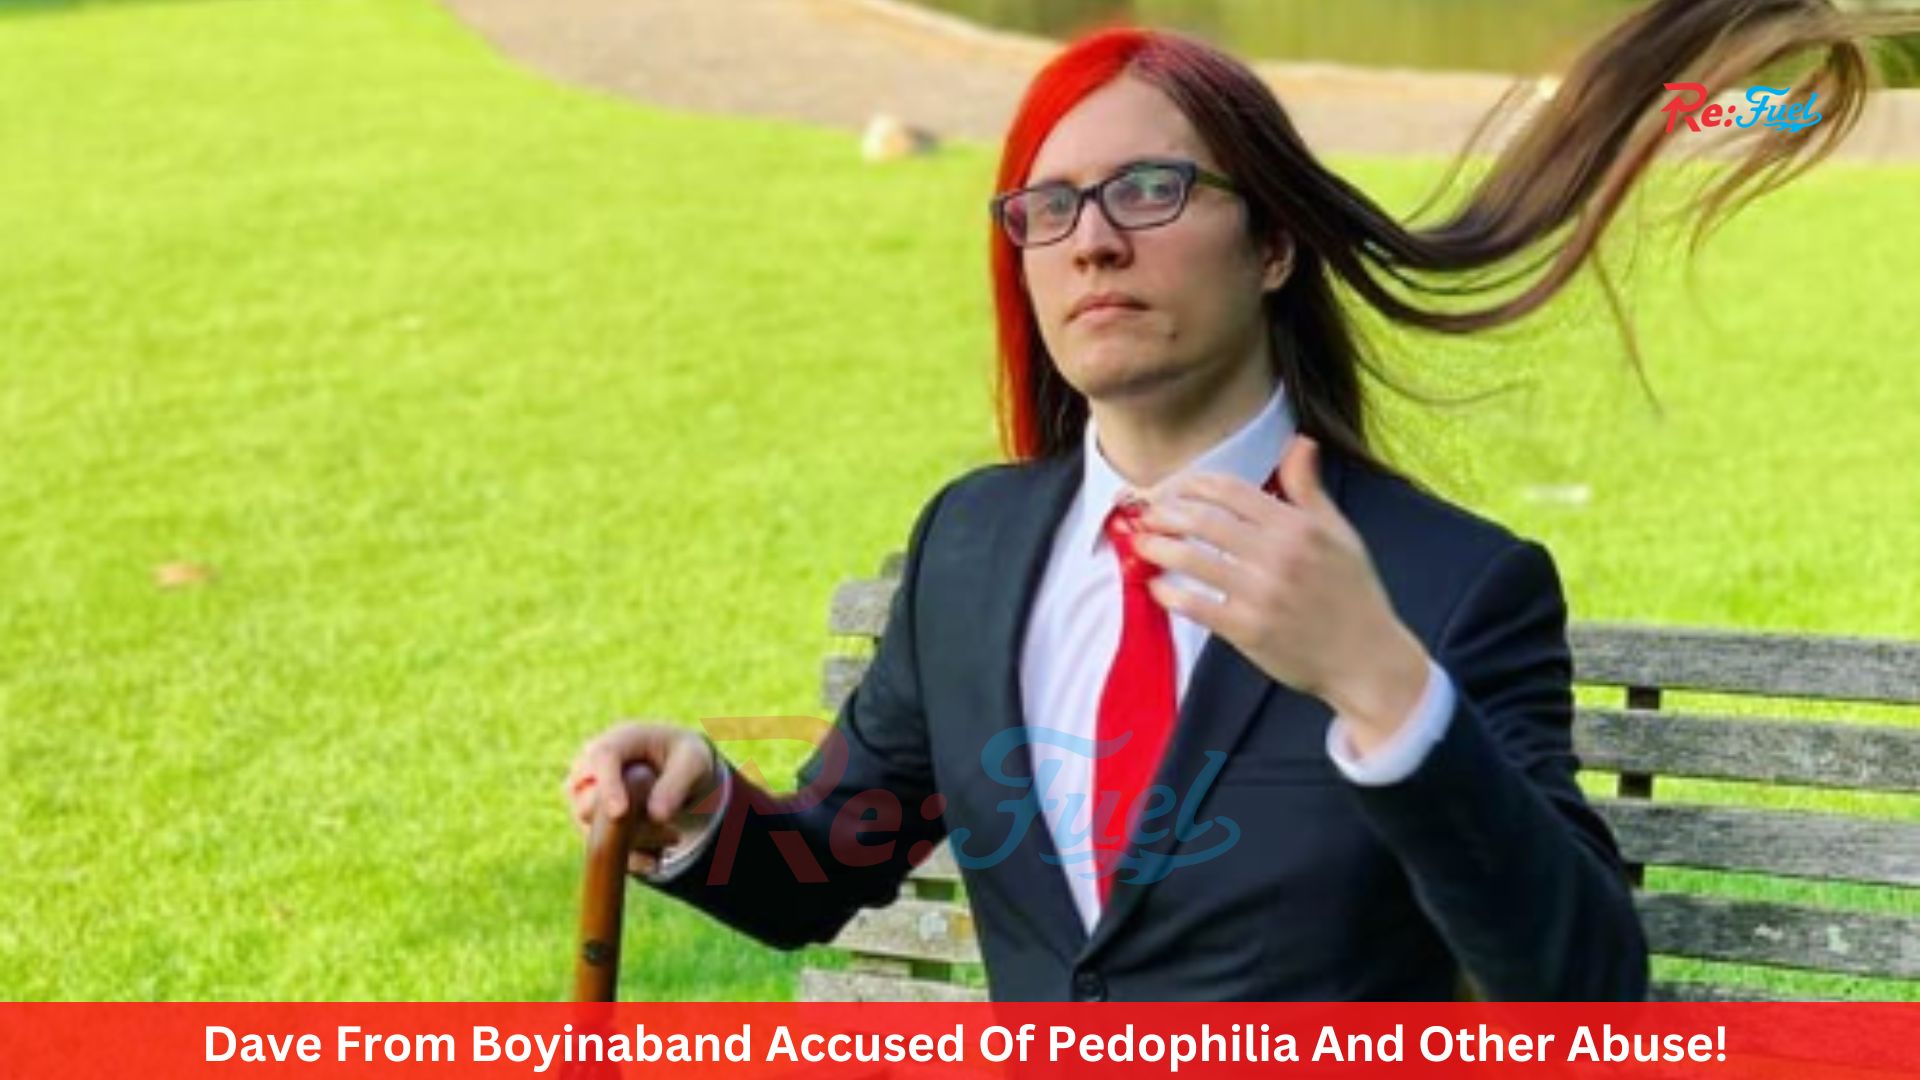 Dave From Boyinaband Accused Of Pedophilia And Other Abuse!